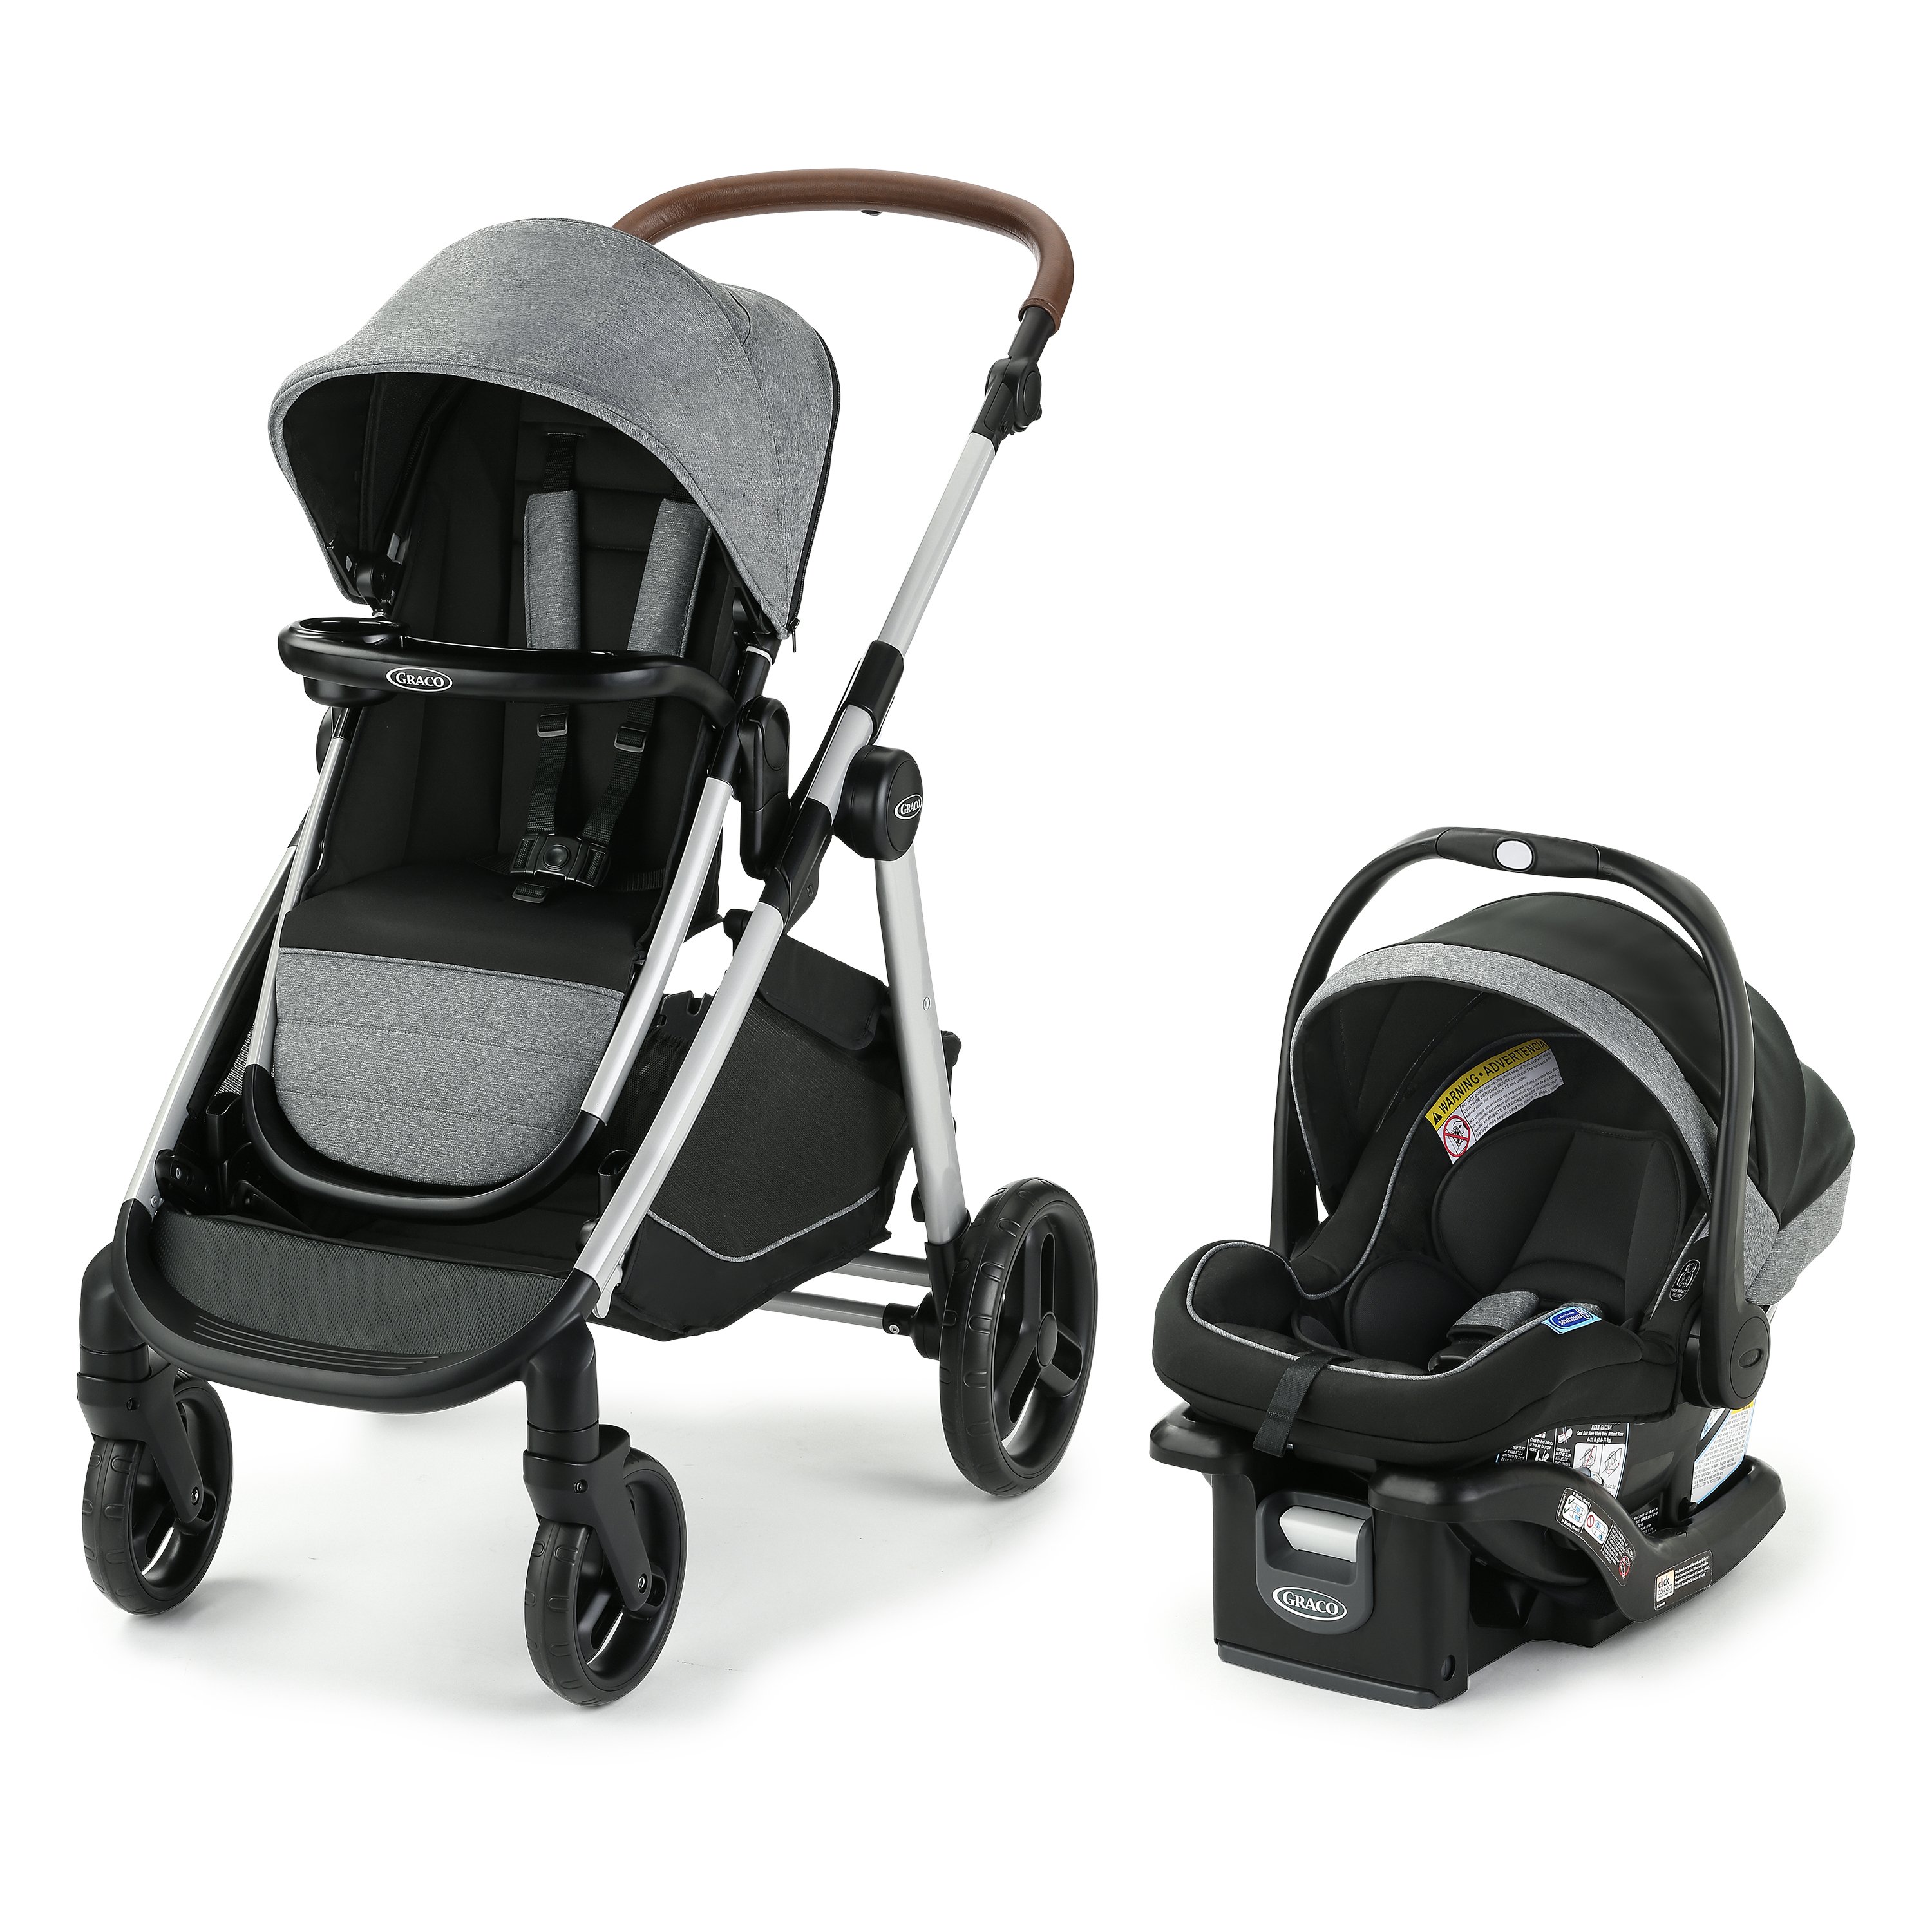 Hauck Rapid 4s Pushchair Review - Me, him, the dog and a baby!